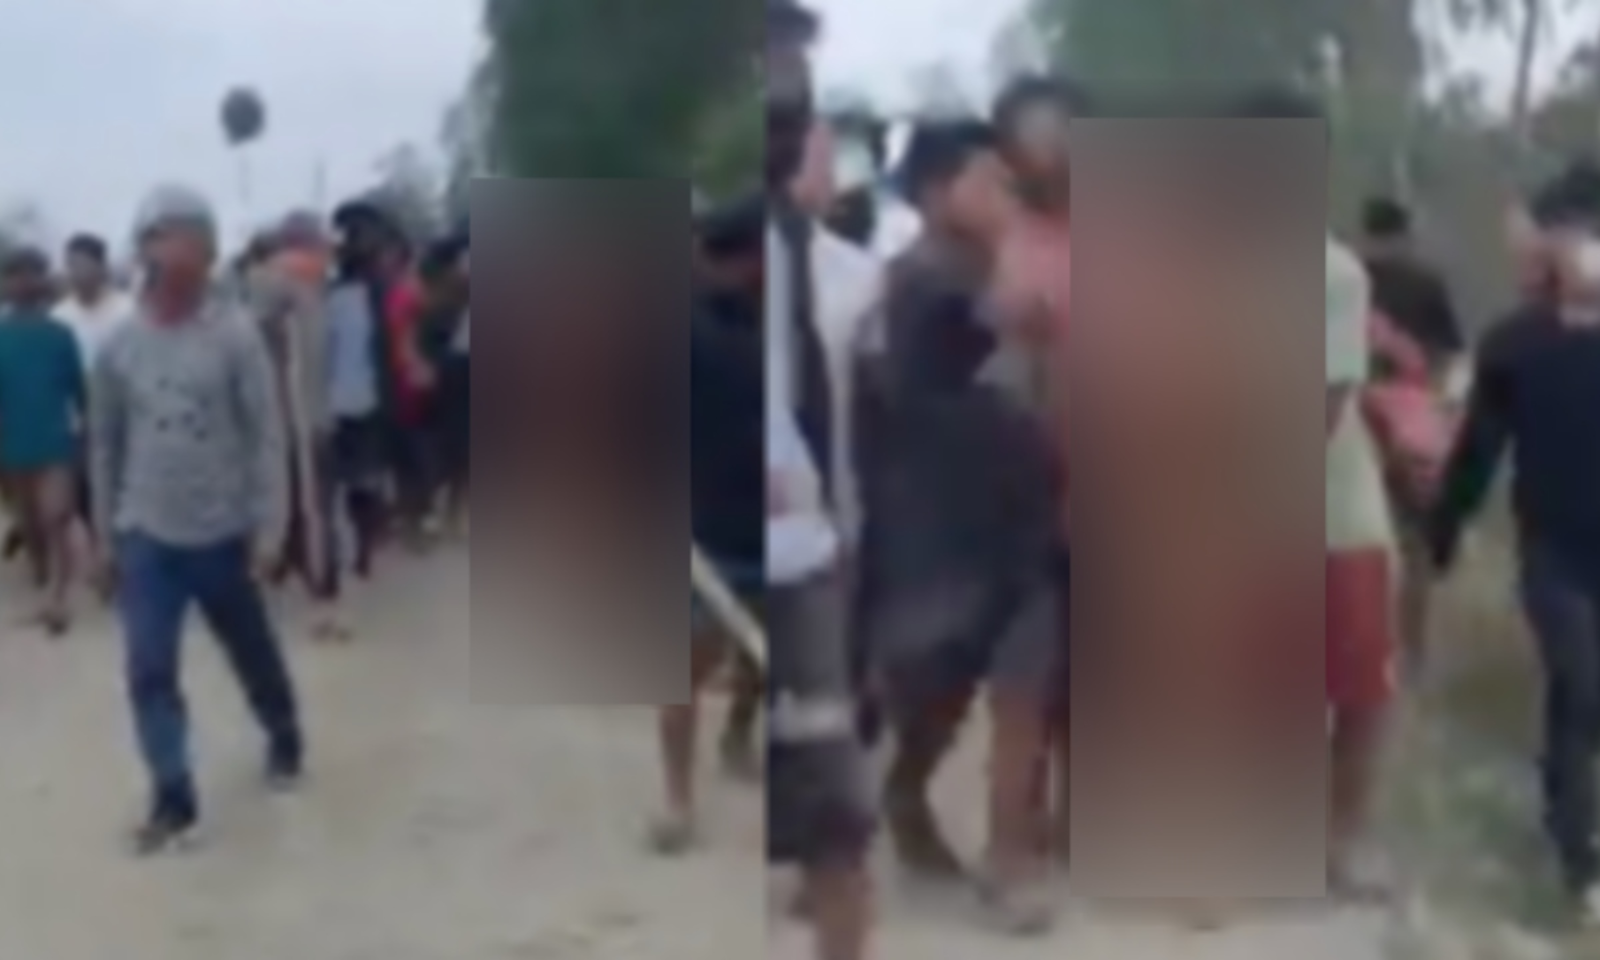 Image Showing the Viral Video of @ women who were raped and paraded by the Mob in Manipur. (Image Courtesy: Live Law) 